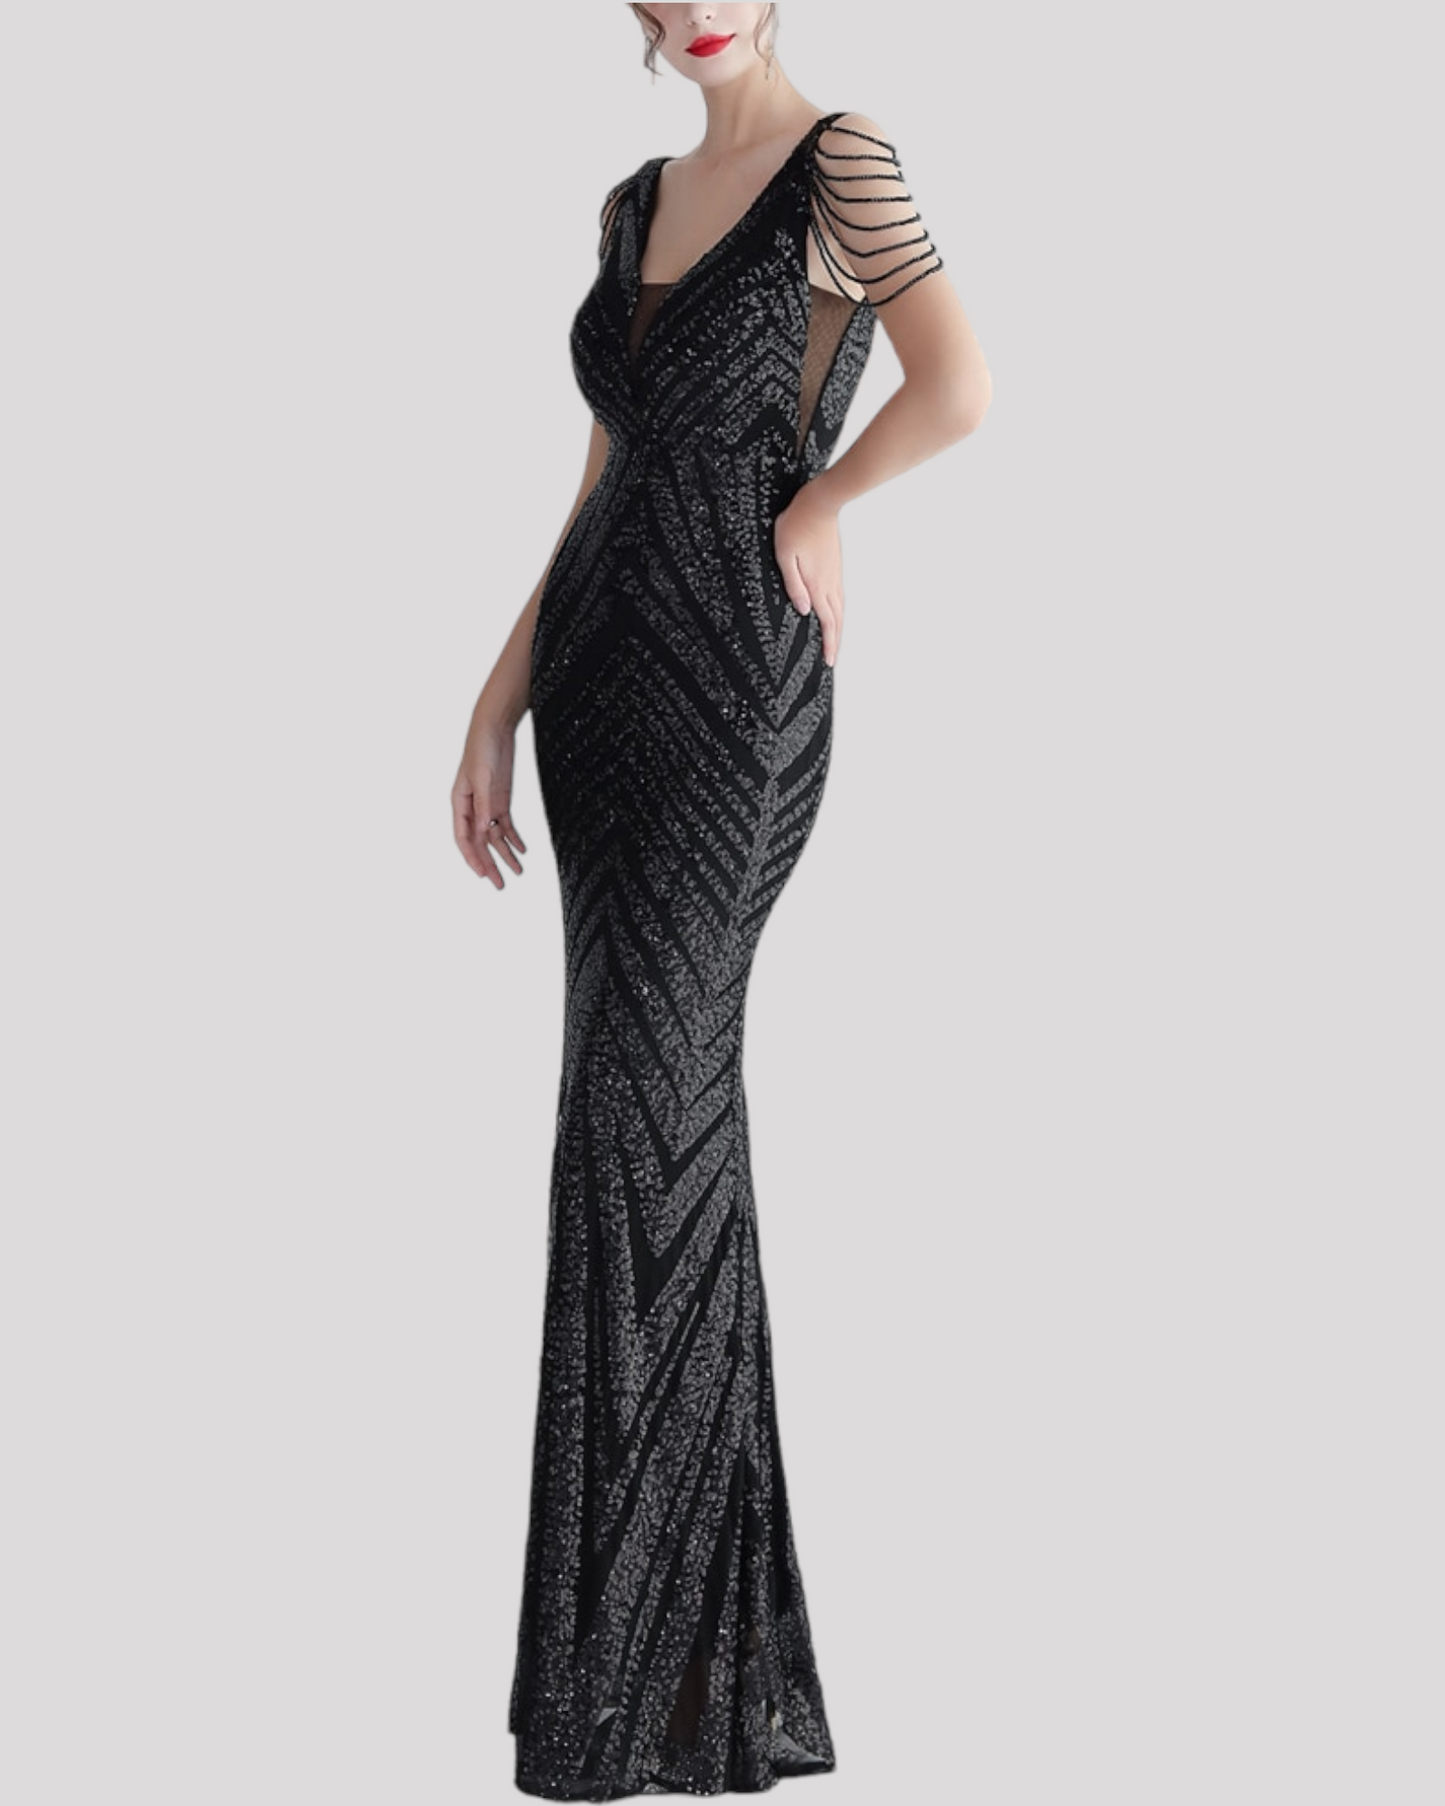 Stunning Mermaid Evening Dress with illusion cut outs and beading draping over shoulders